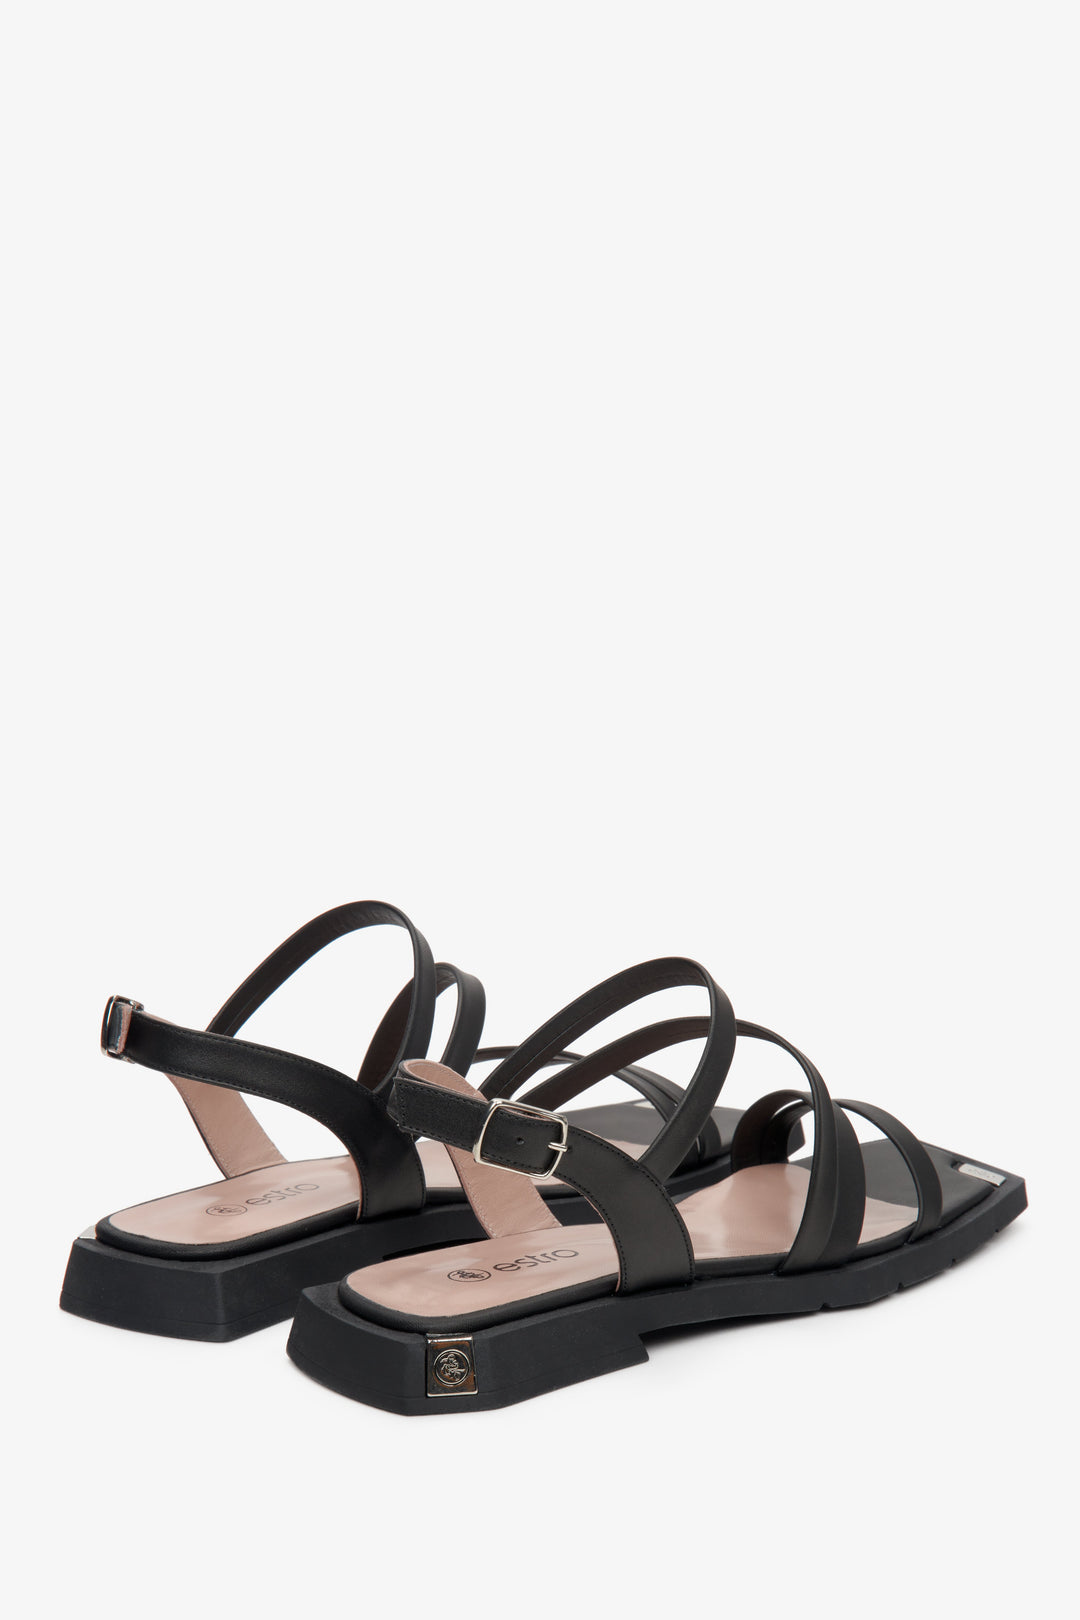 Leather, women's black sandals by Estro with thin straps - presentation of the back part of the shoes.